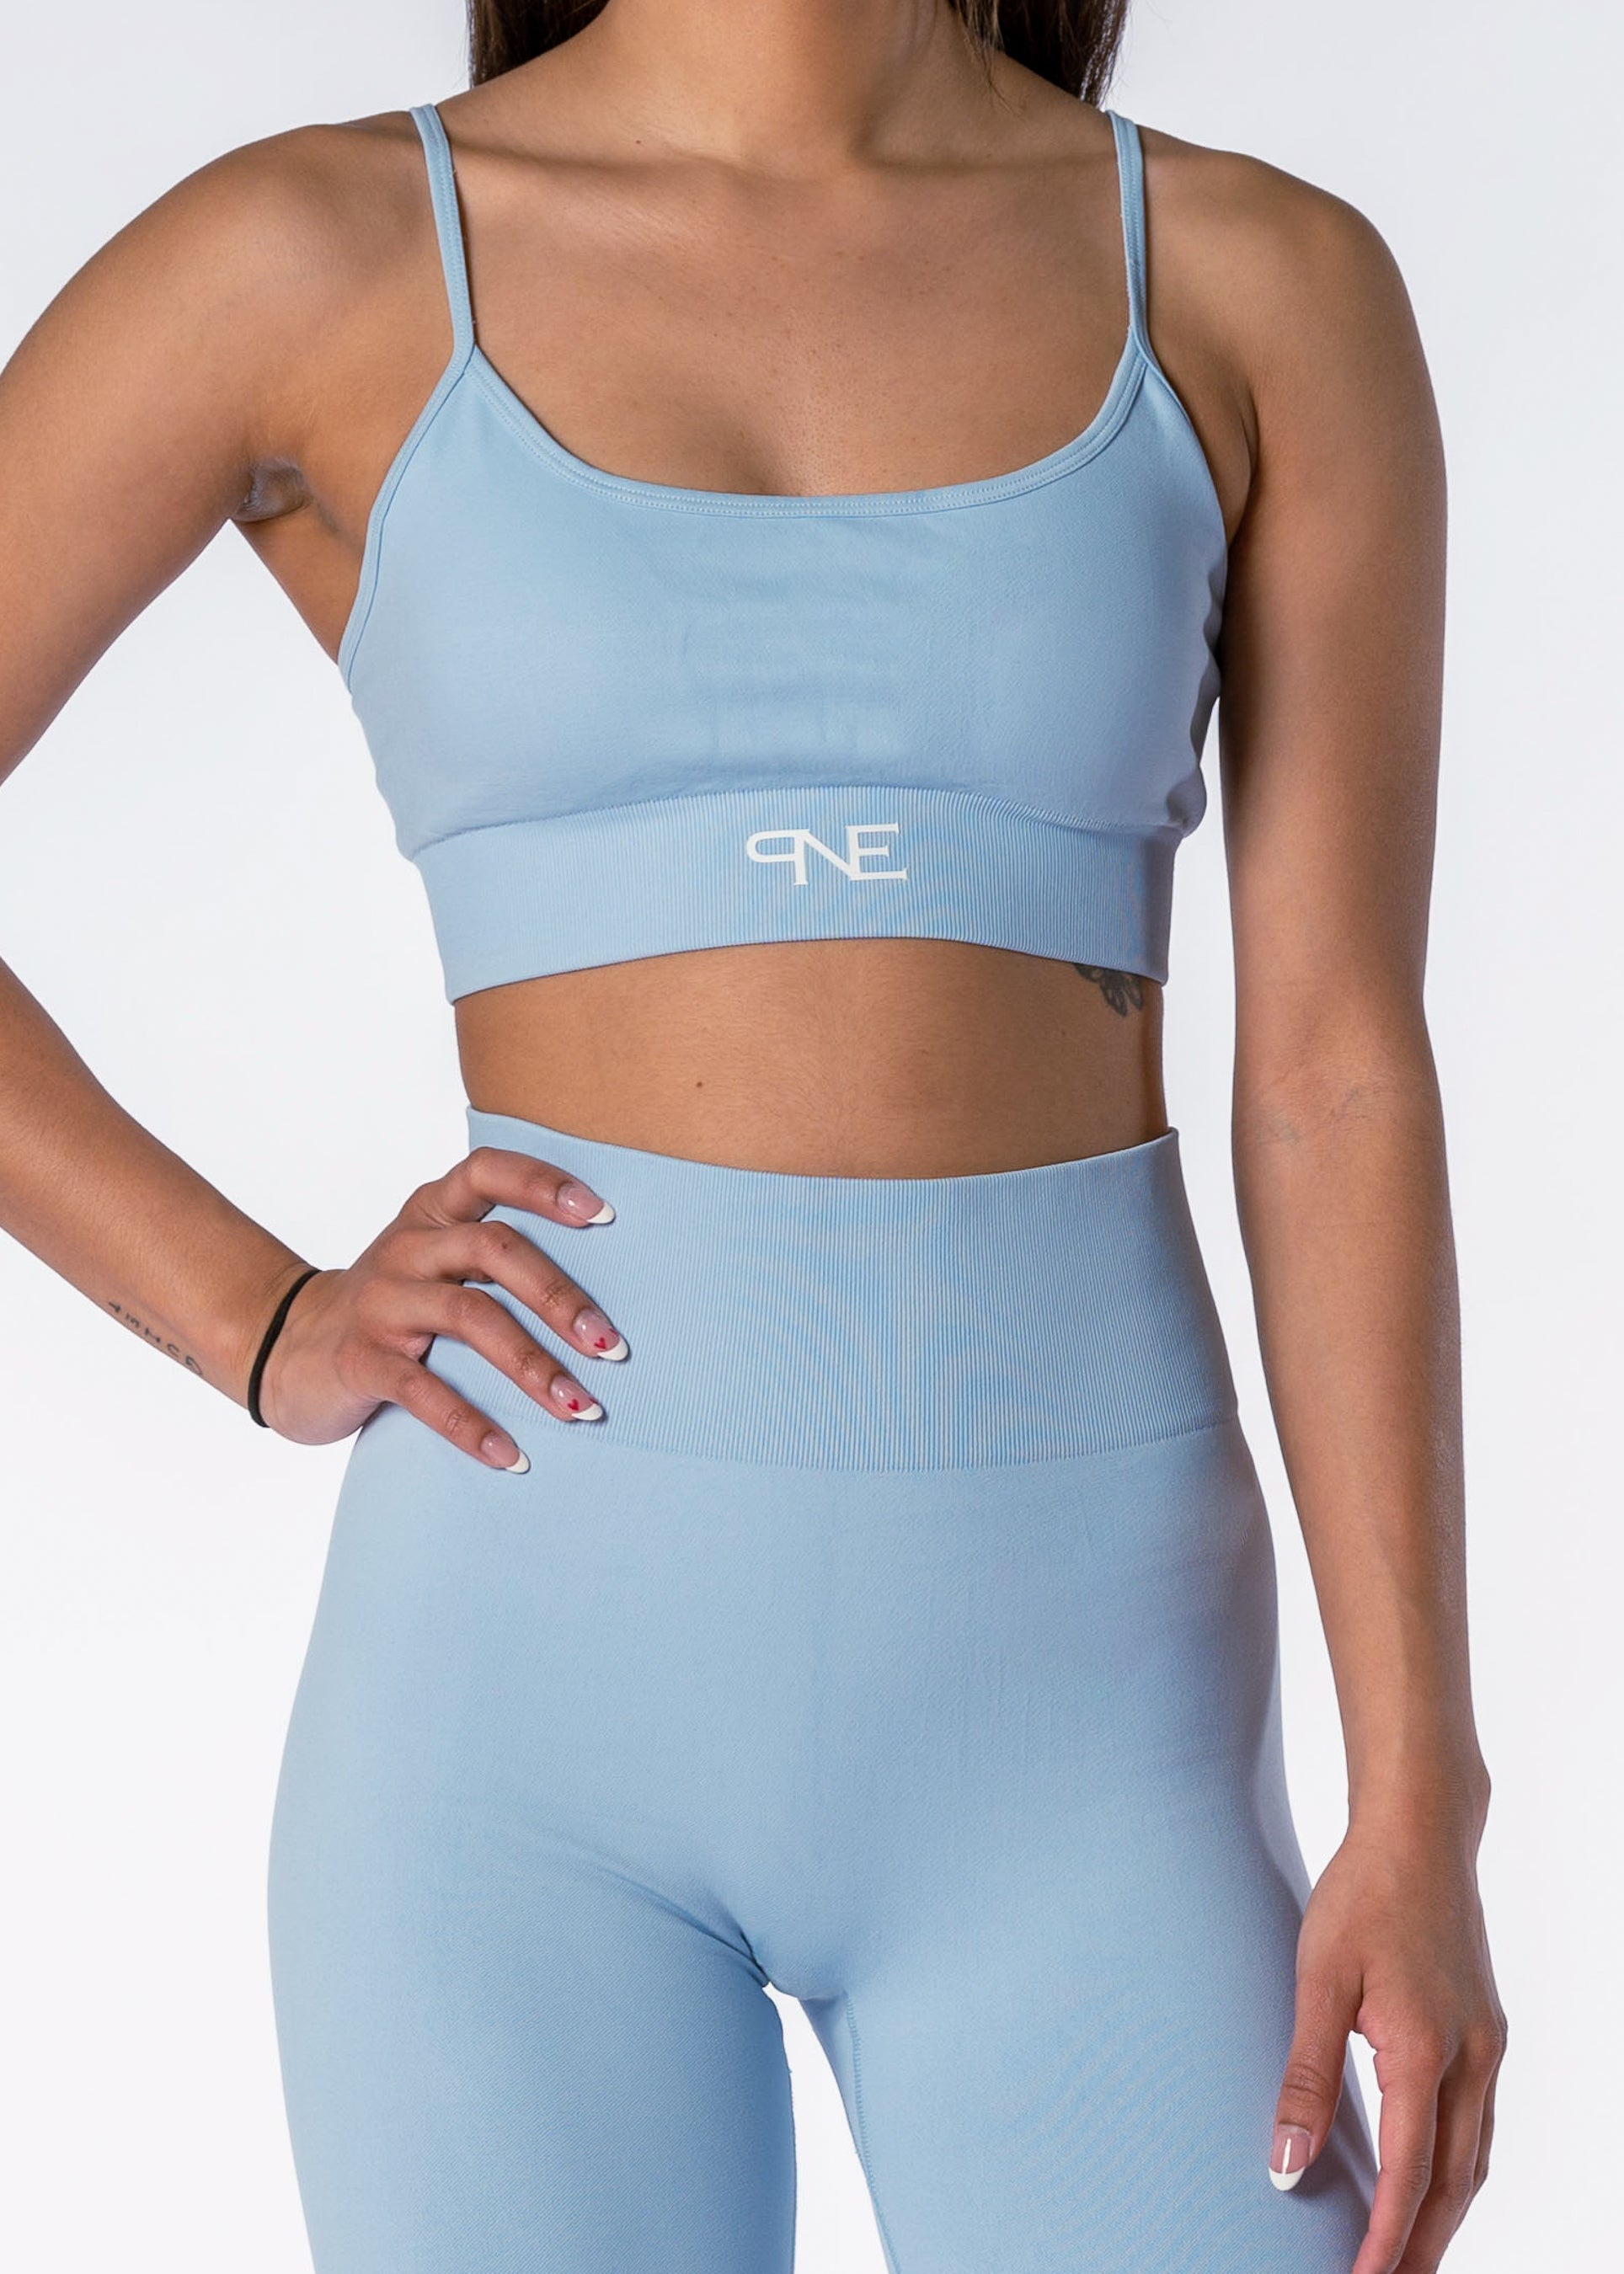 THE NEW ERA EVERYDAY SPORTS BRA IN POWDER BLUE – Physiques New Era